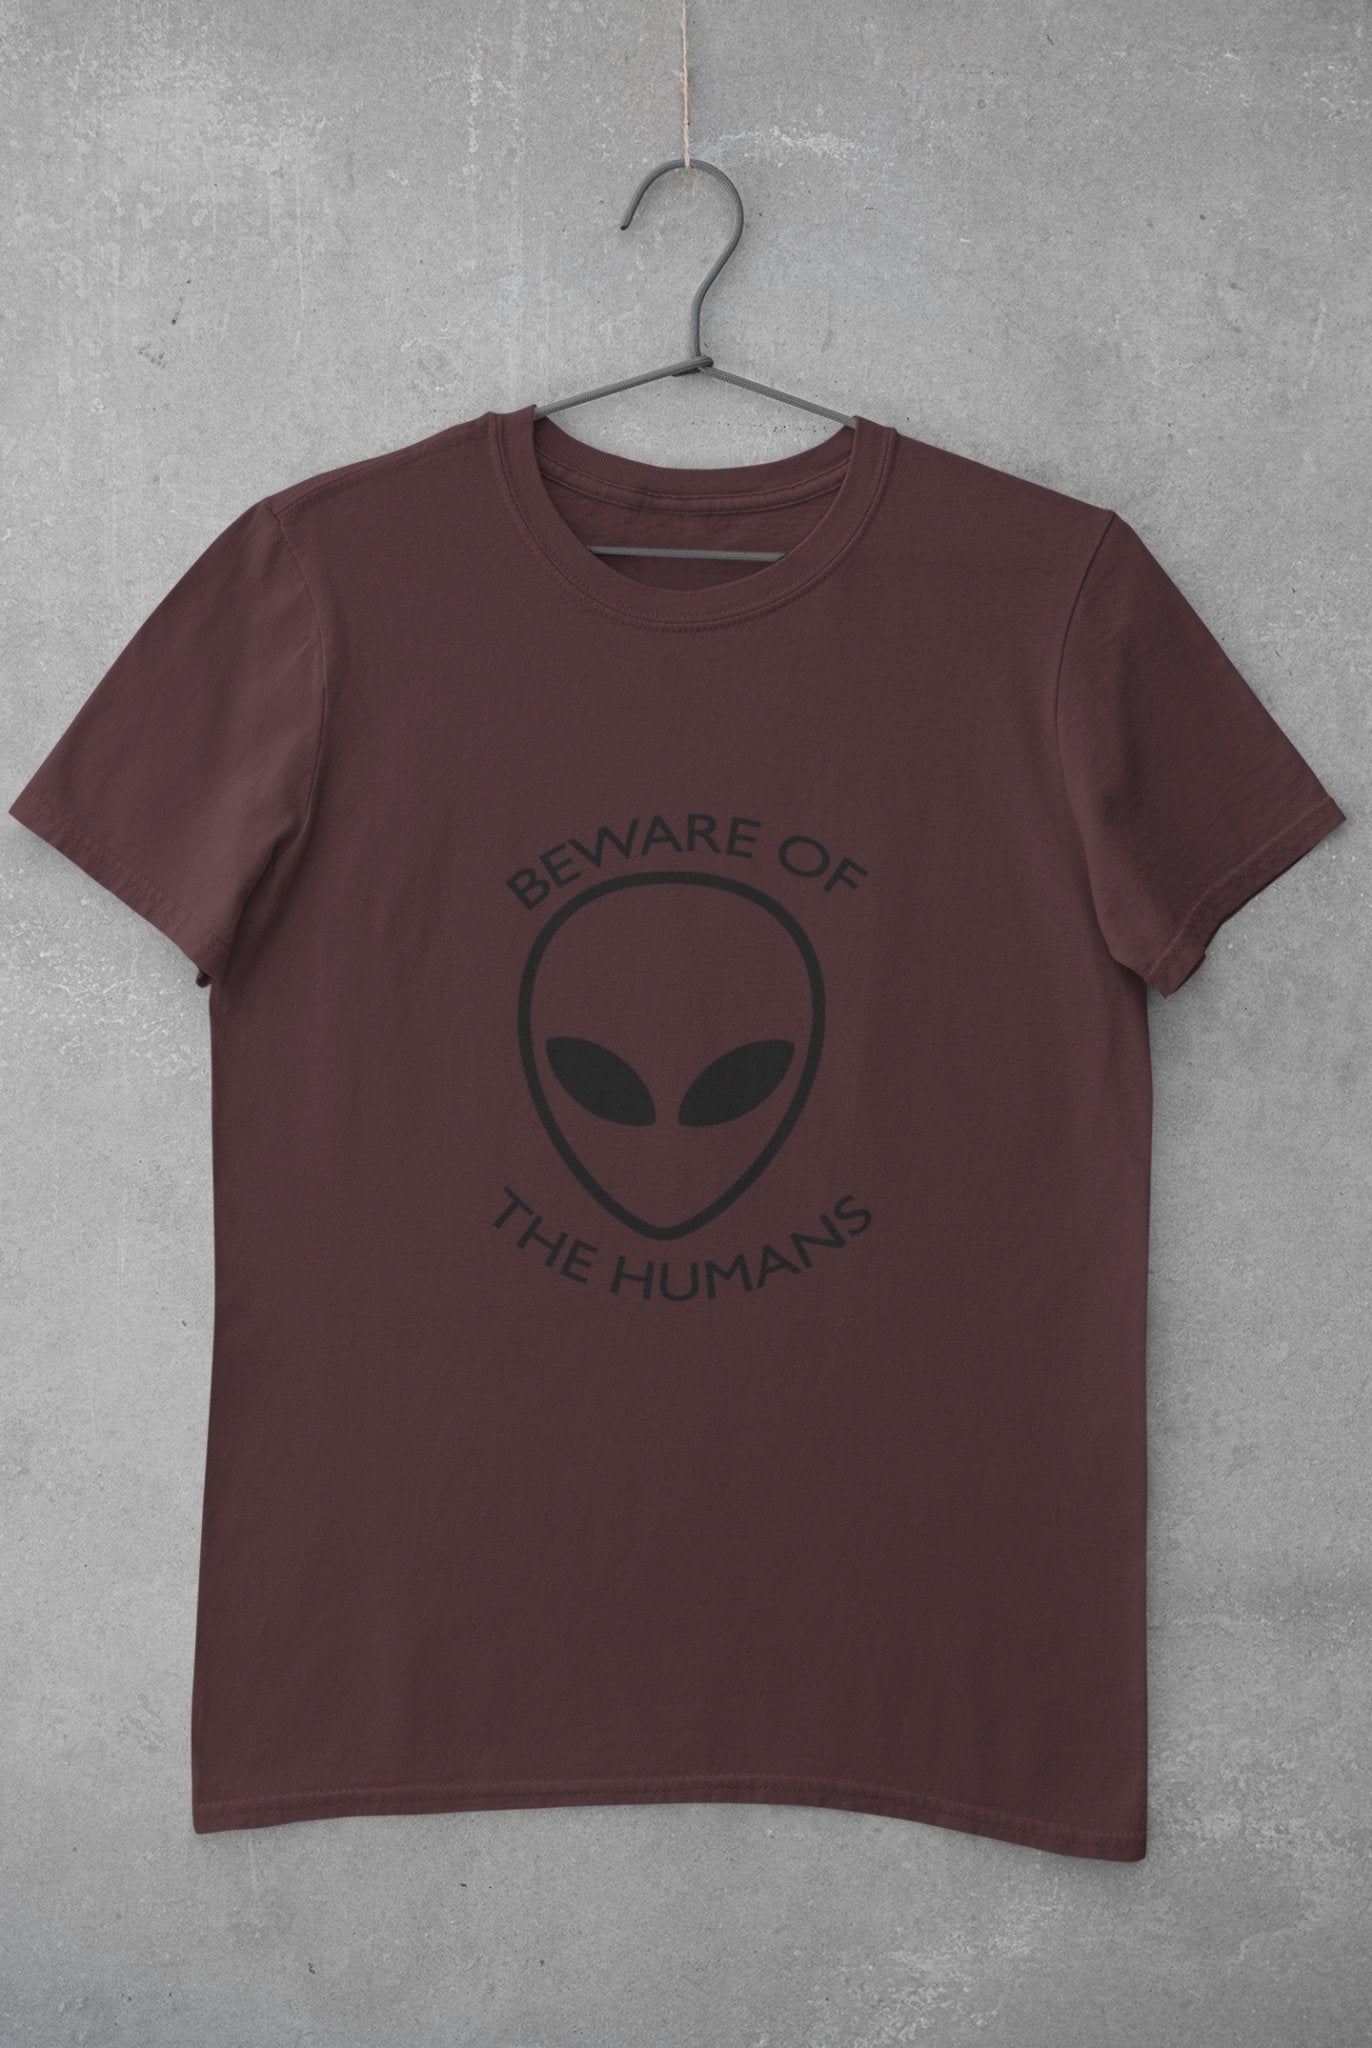 Beware of The Humans Women Half Sleeves T-shirt- FunkyTradition - Funky Tees Club